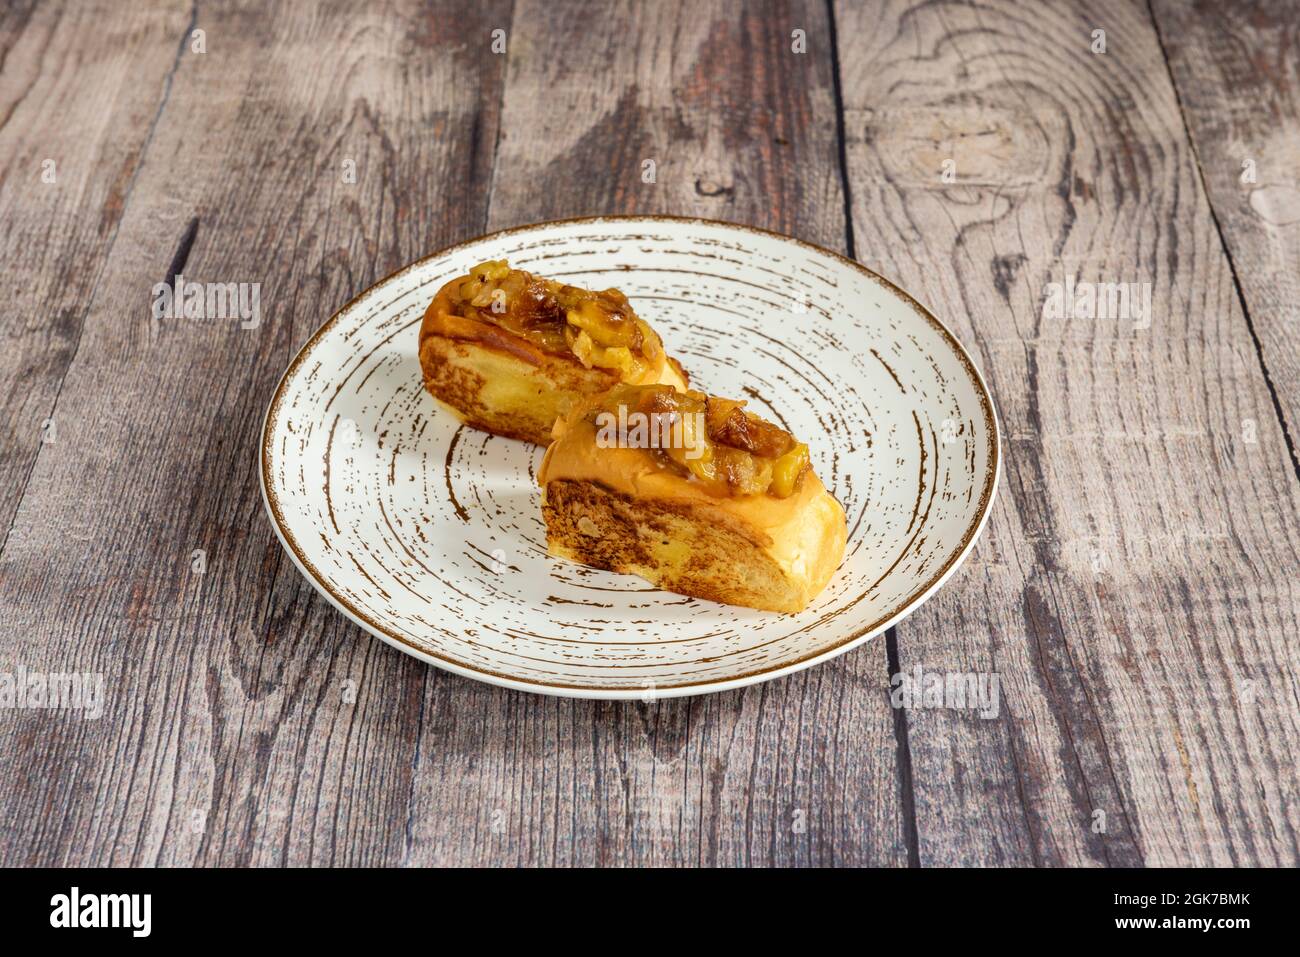 Toasted brioche bread filled with spectacular Spanish potato omelette on white plate Stock Photo